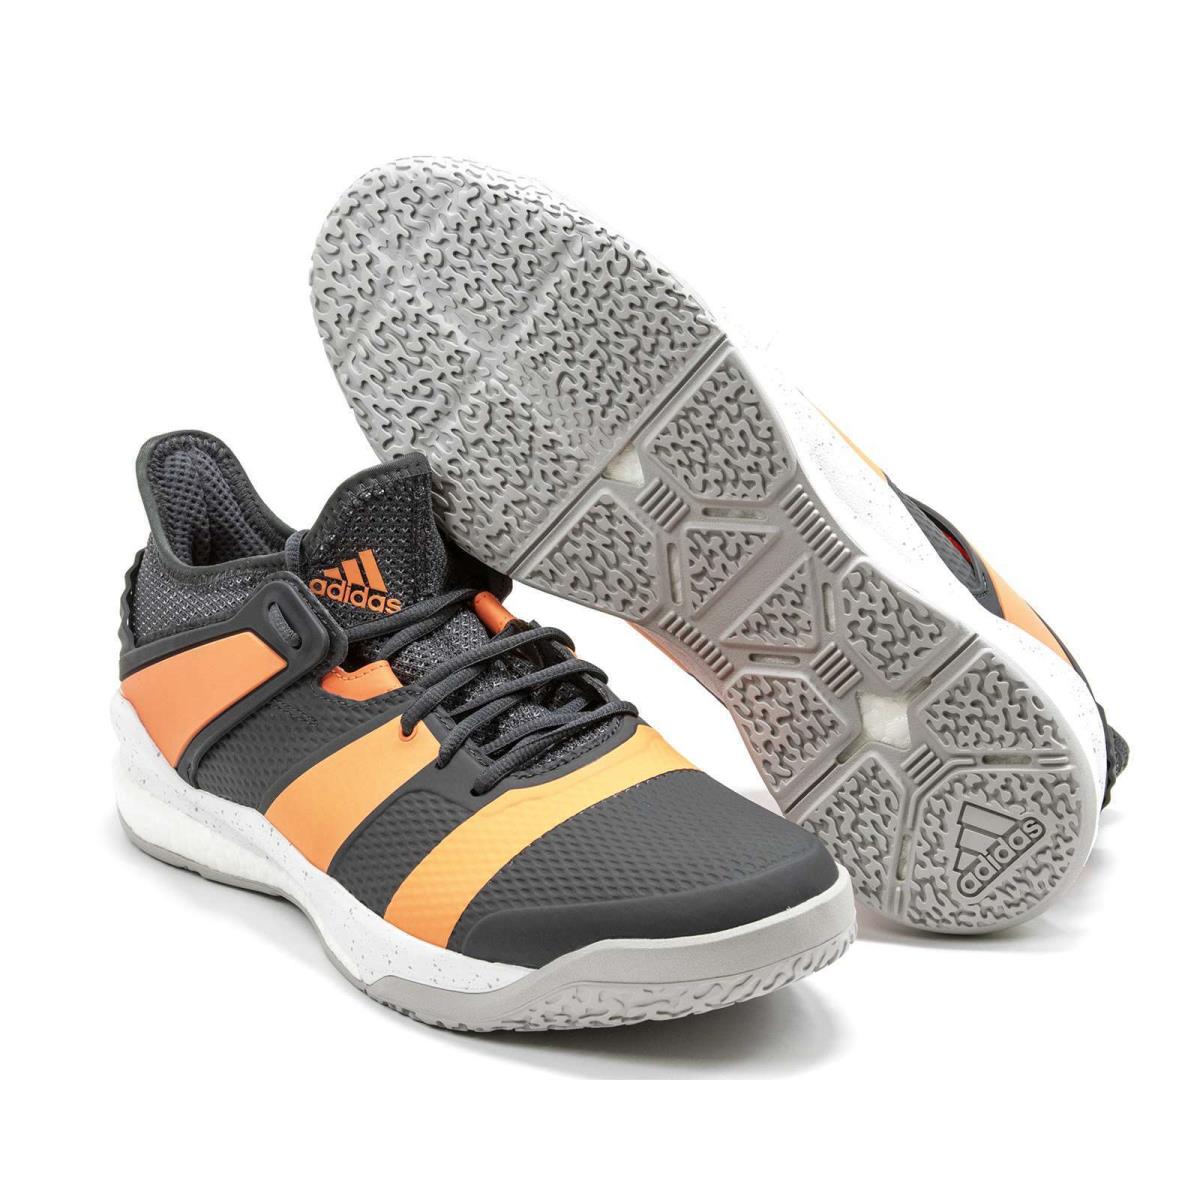 Mens Adidas Stabil x Cross Trainer Grey Athletic Shoes Indoor Court Sneakers